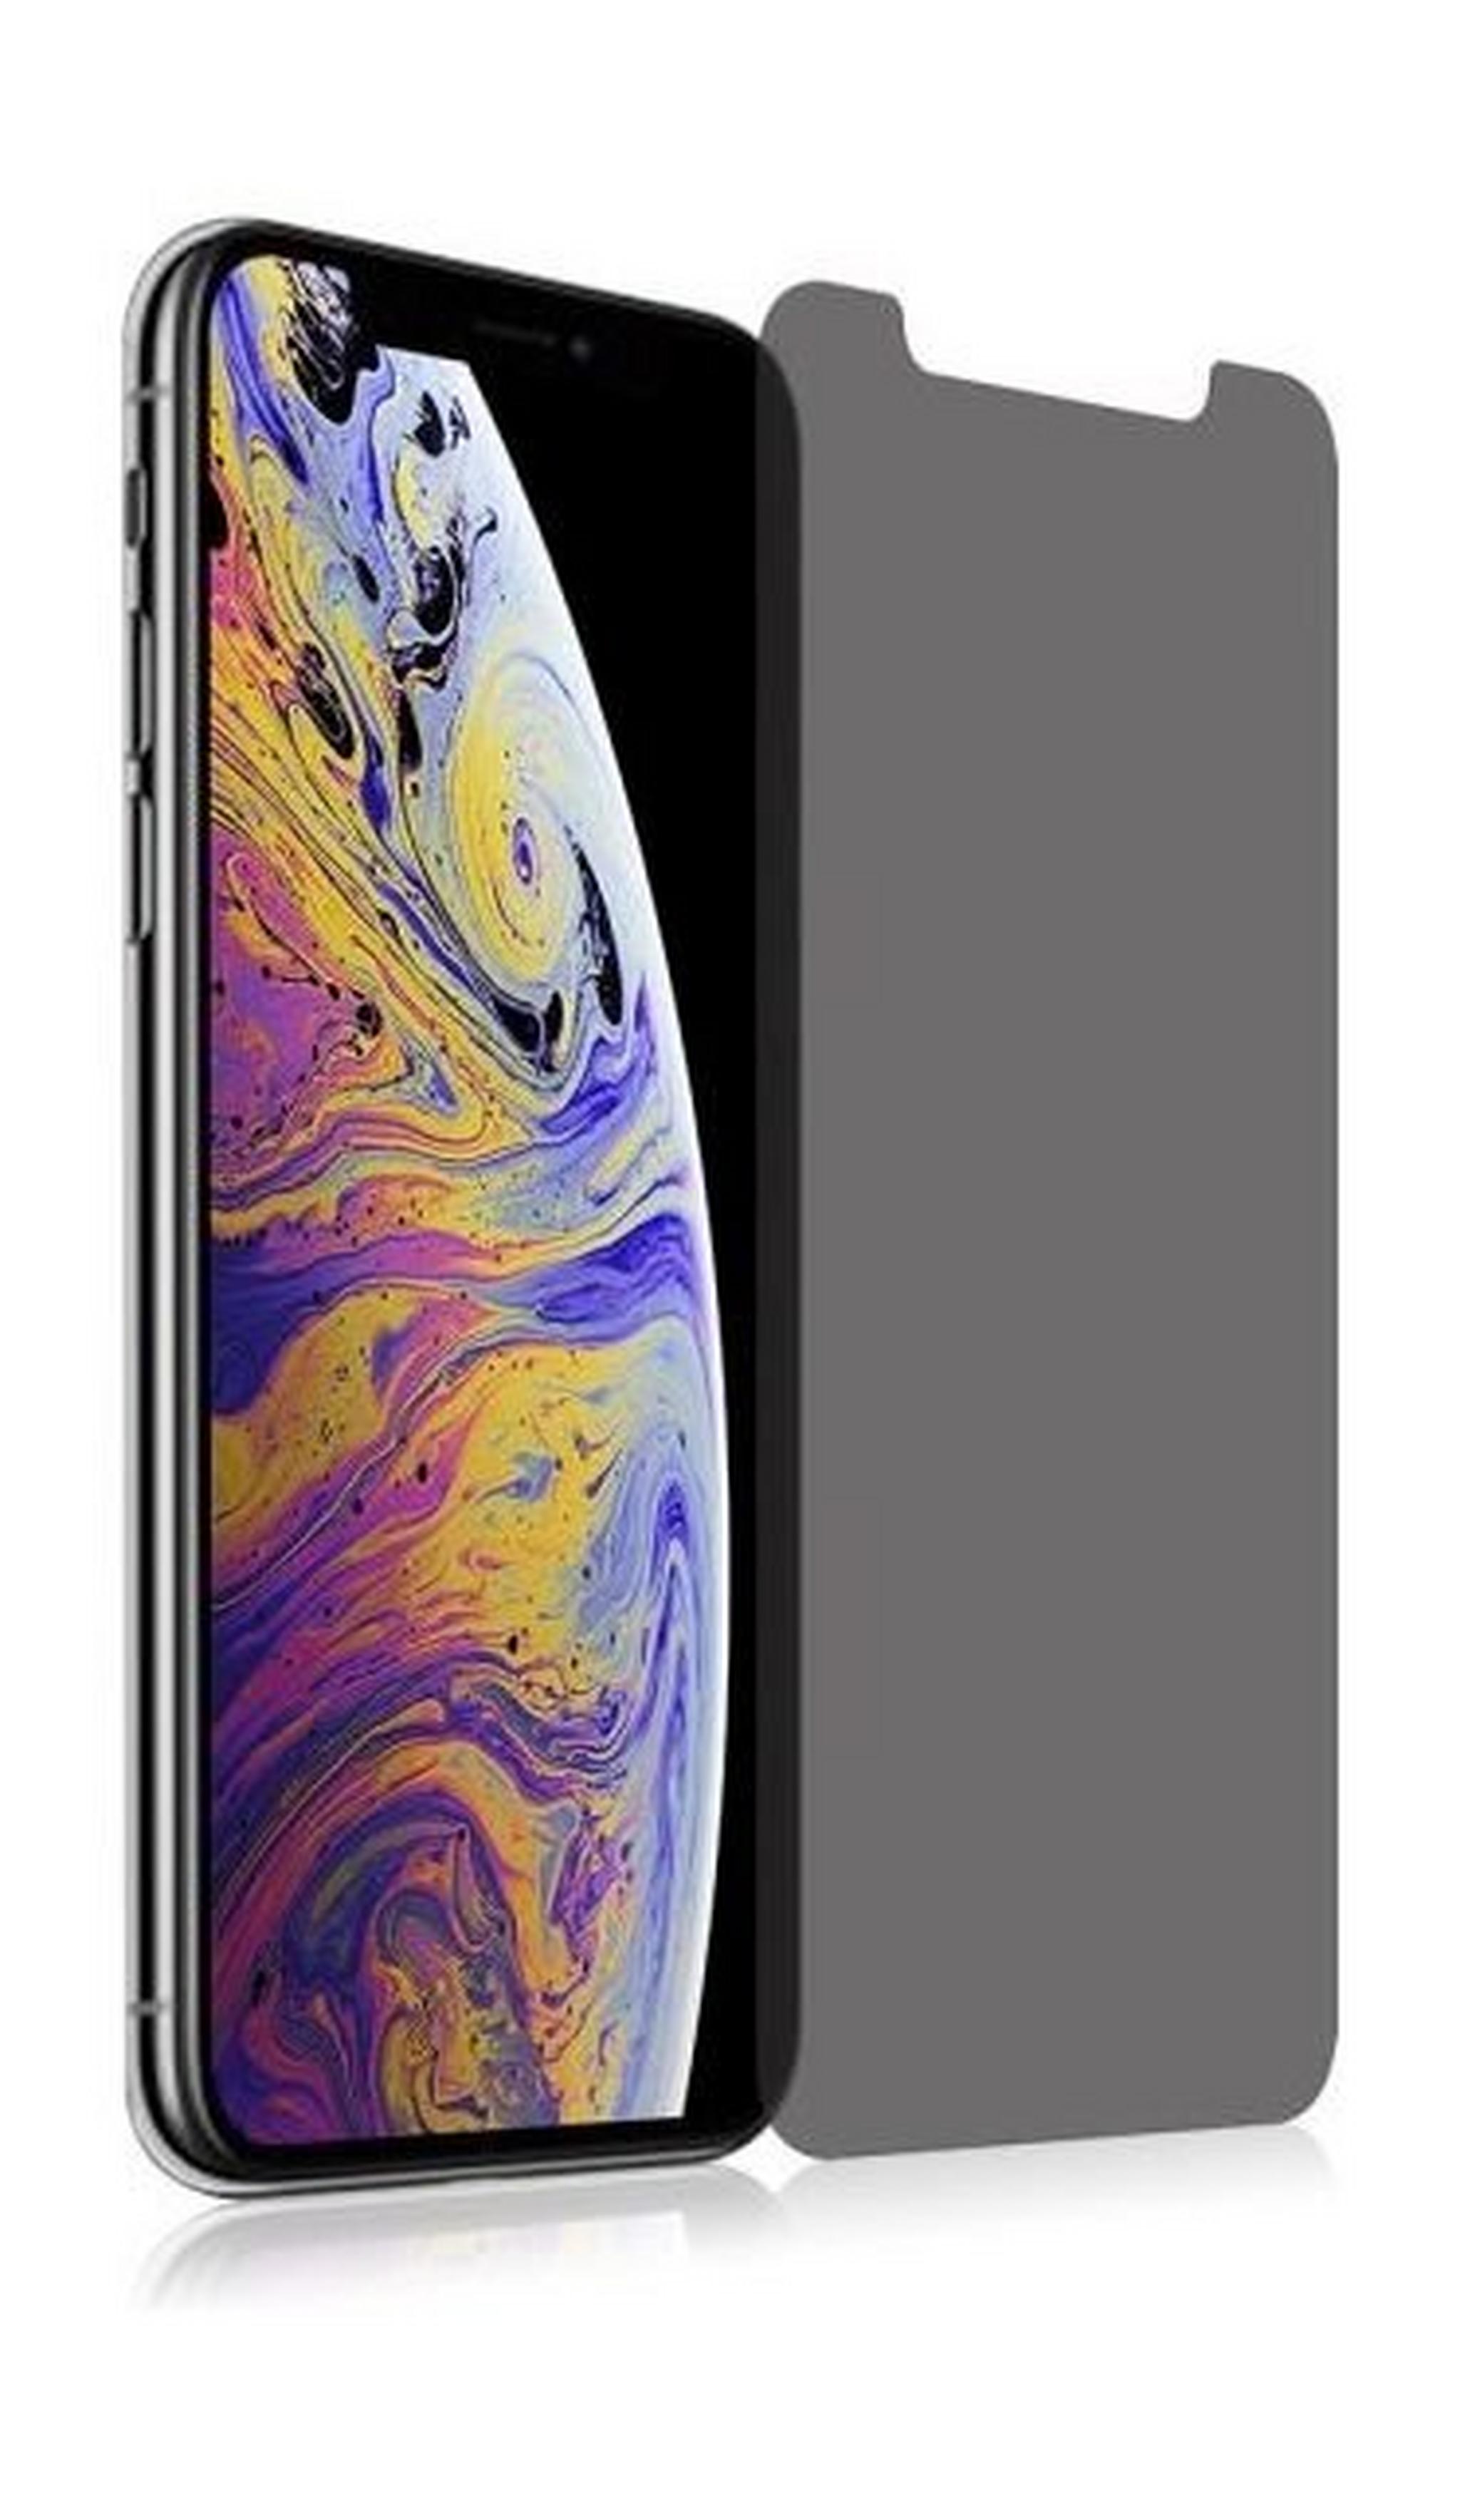 Baykron Privacy screen protector for iPhone XS